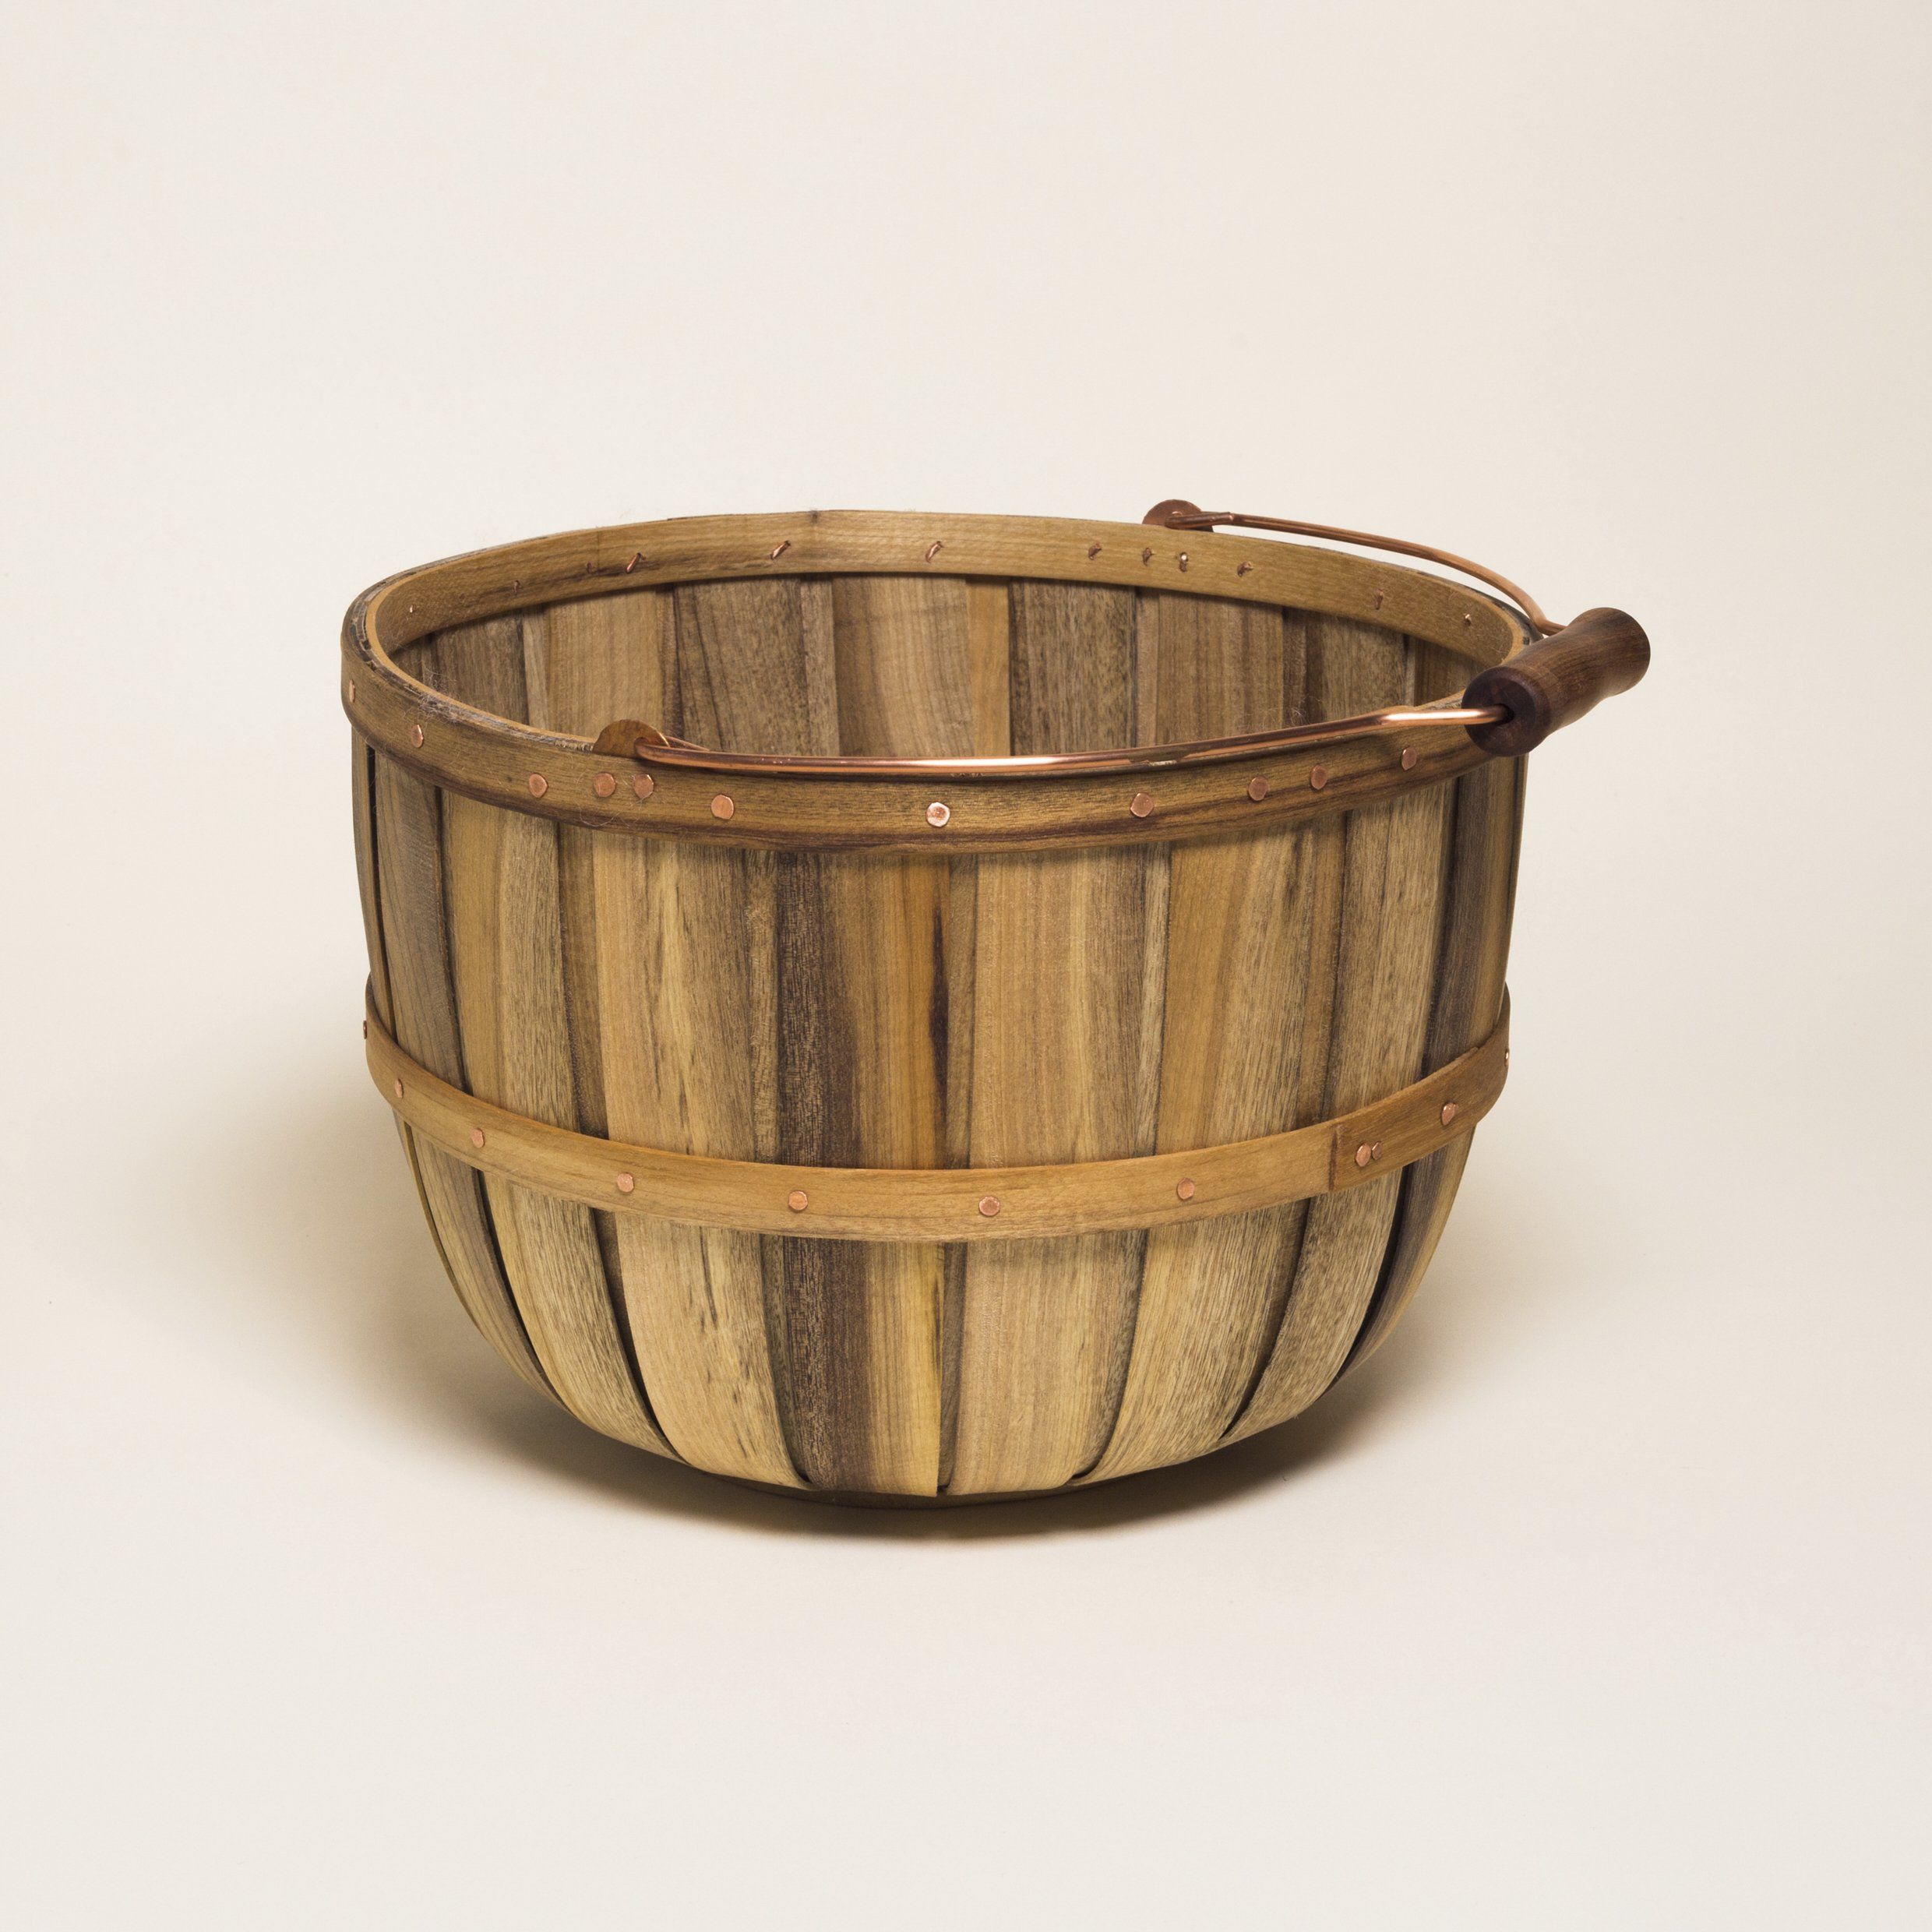 A large tall round rustic wooden basket with a metal and wood handle